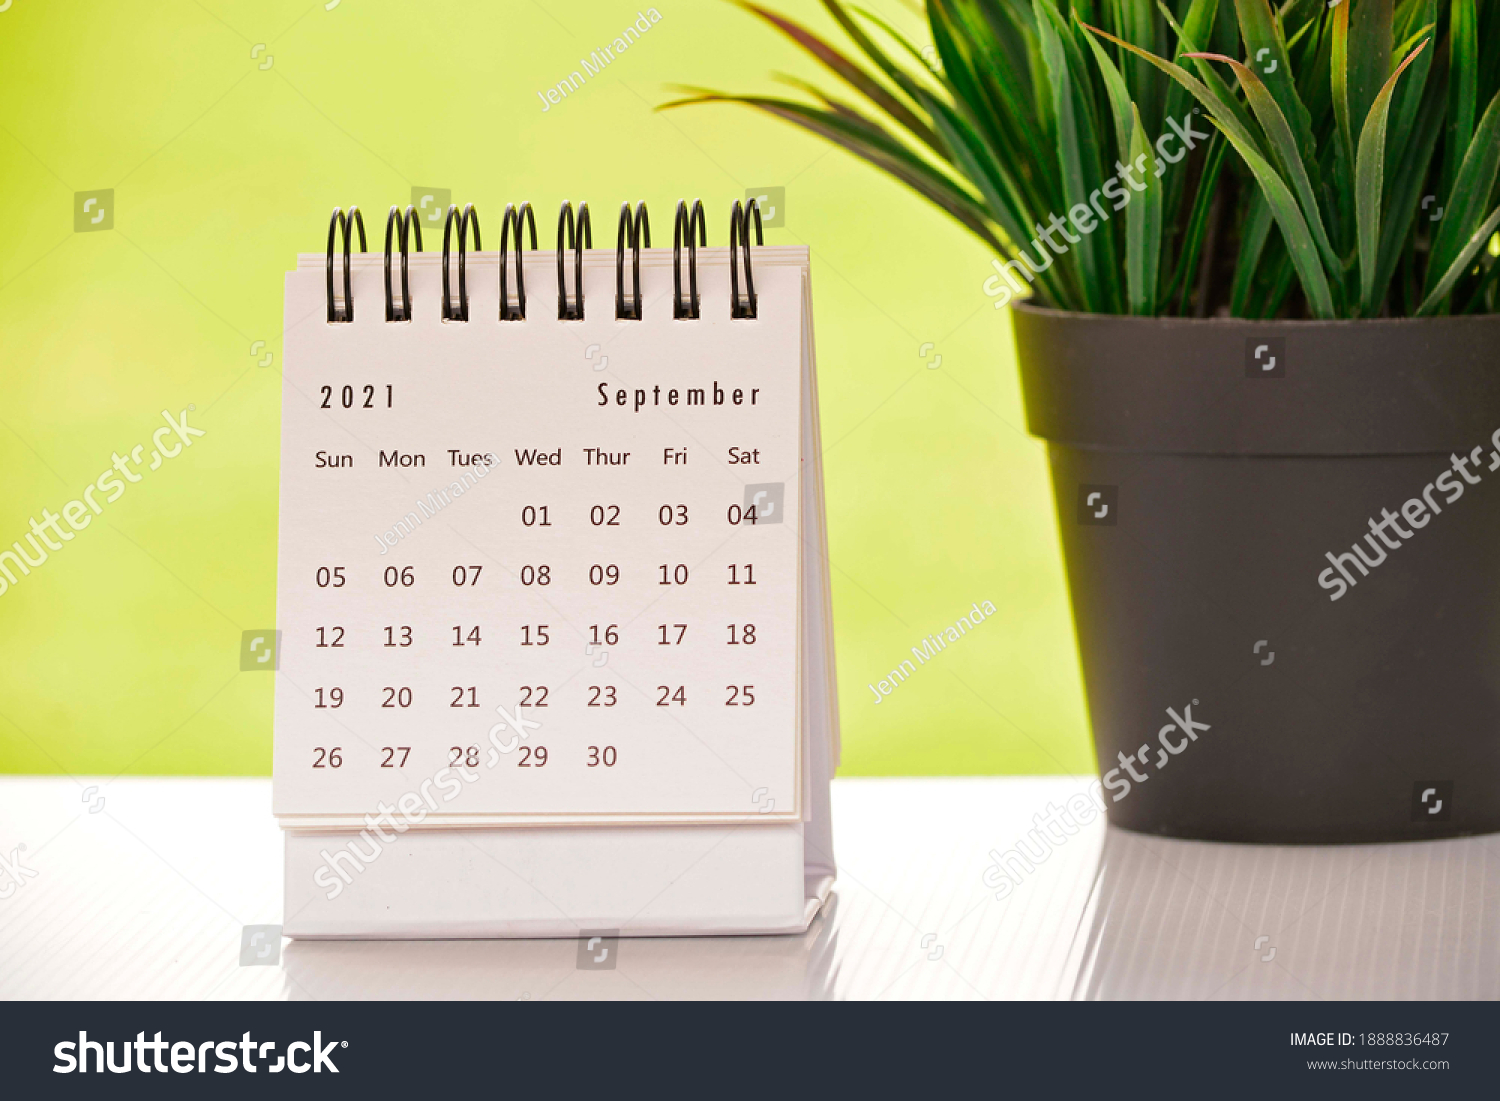 White September 2021 calendar with green backgrounds and potted plant. 2021 New Year Concept #1888836487